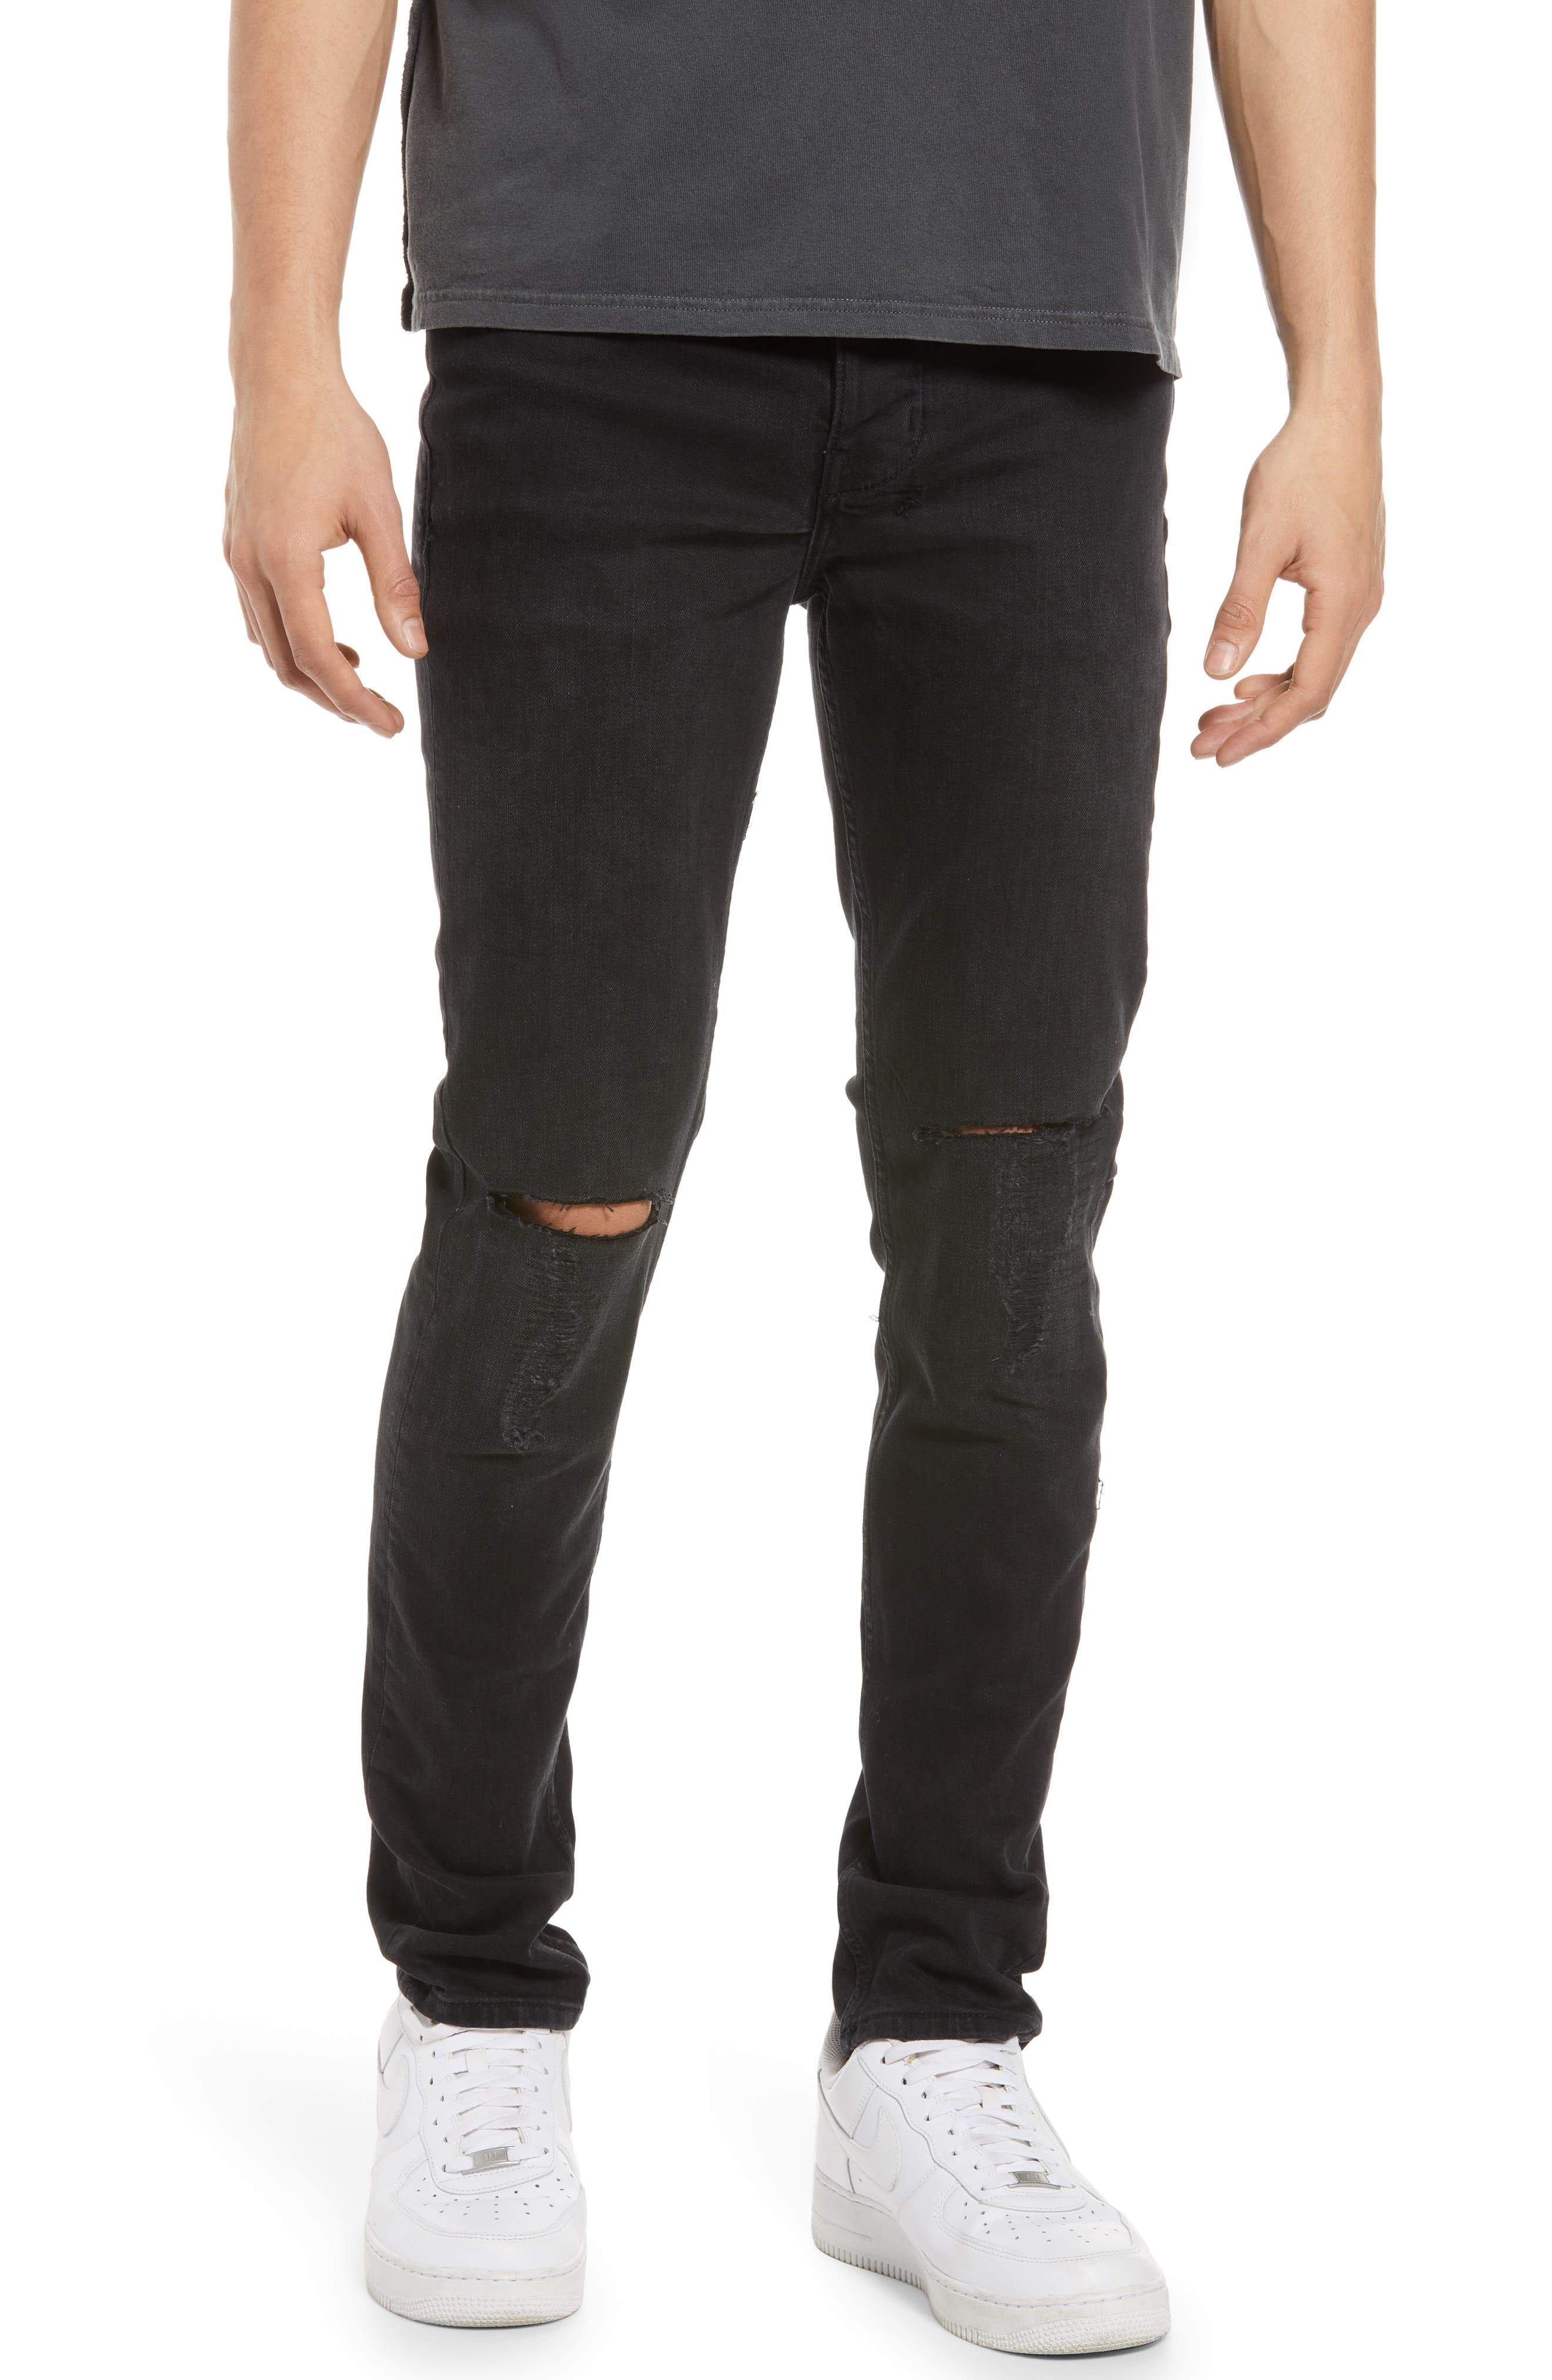 Ksubi Chitch Krow Krushed Ripped Skinny Fit Stretch Jeans in Black at Nordstrom, Size 33